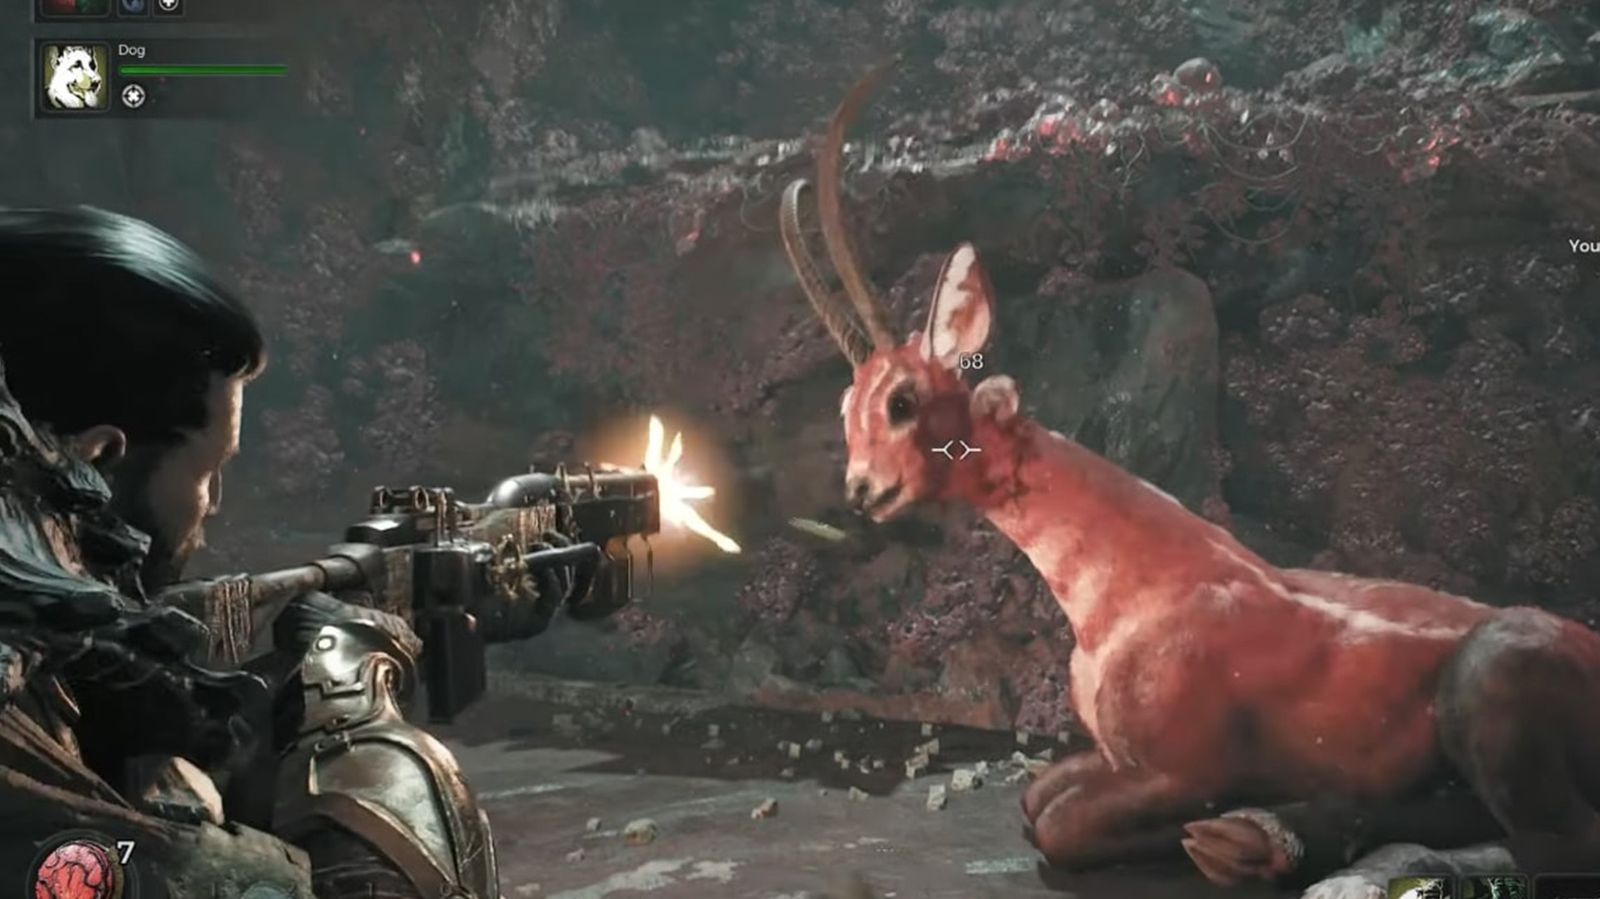 A screenshot of killing the doe in Remnant 2.